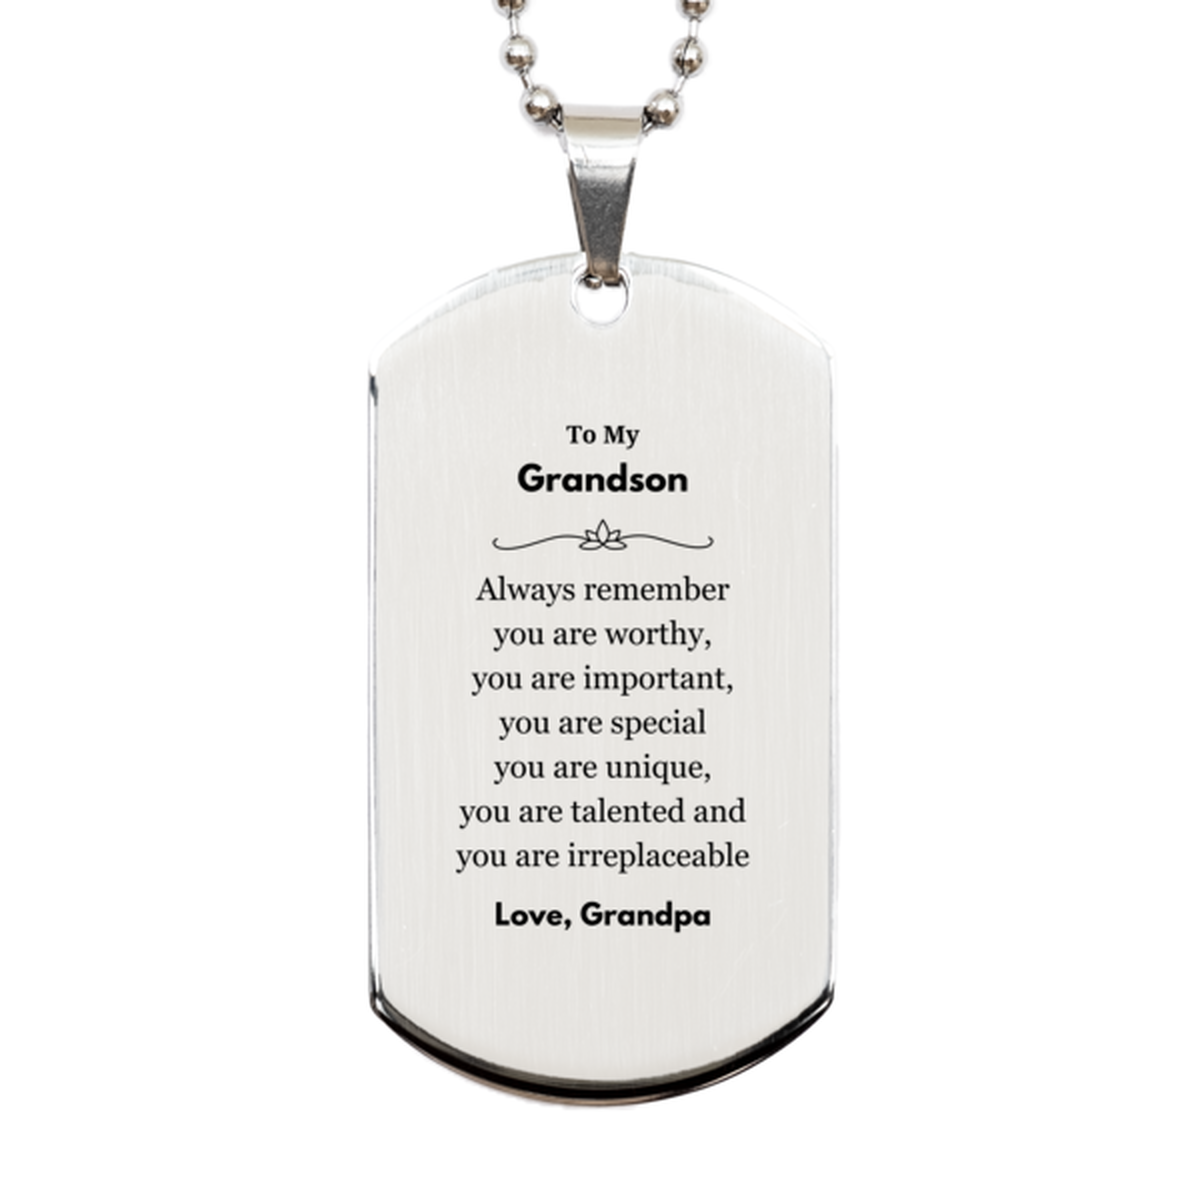 Grandson Birthday Gifts from Grandpa, Inspirational Silver Dog Tag for Grandson Christmas Graduation Gifts for Grandson Always remember you are worthy, you are important. Love, Grandpa